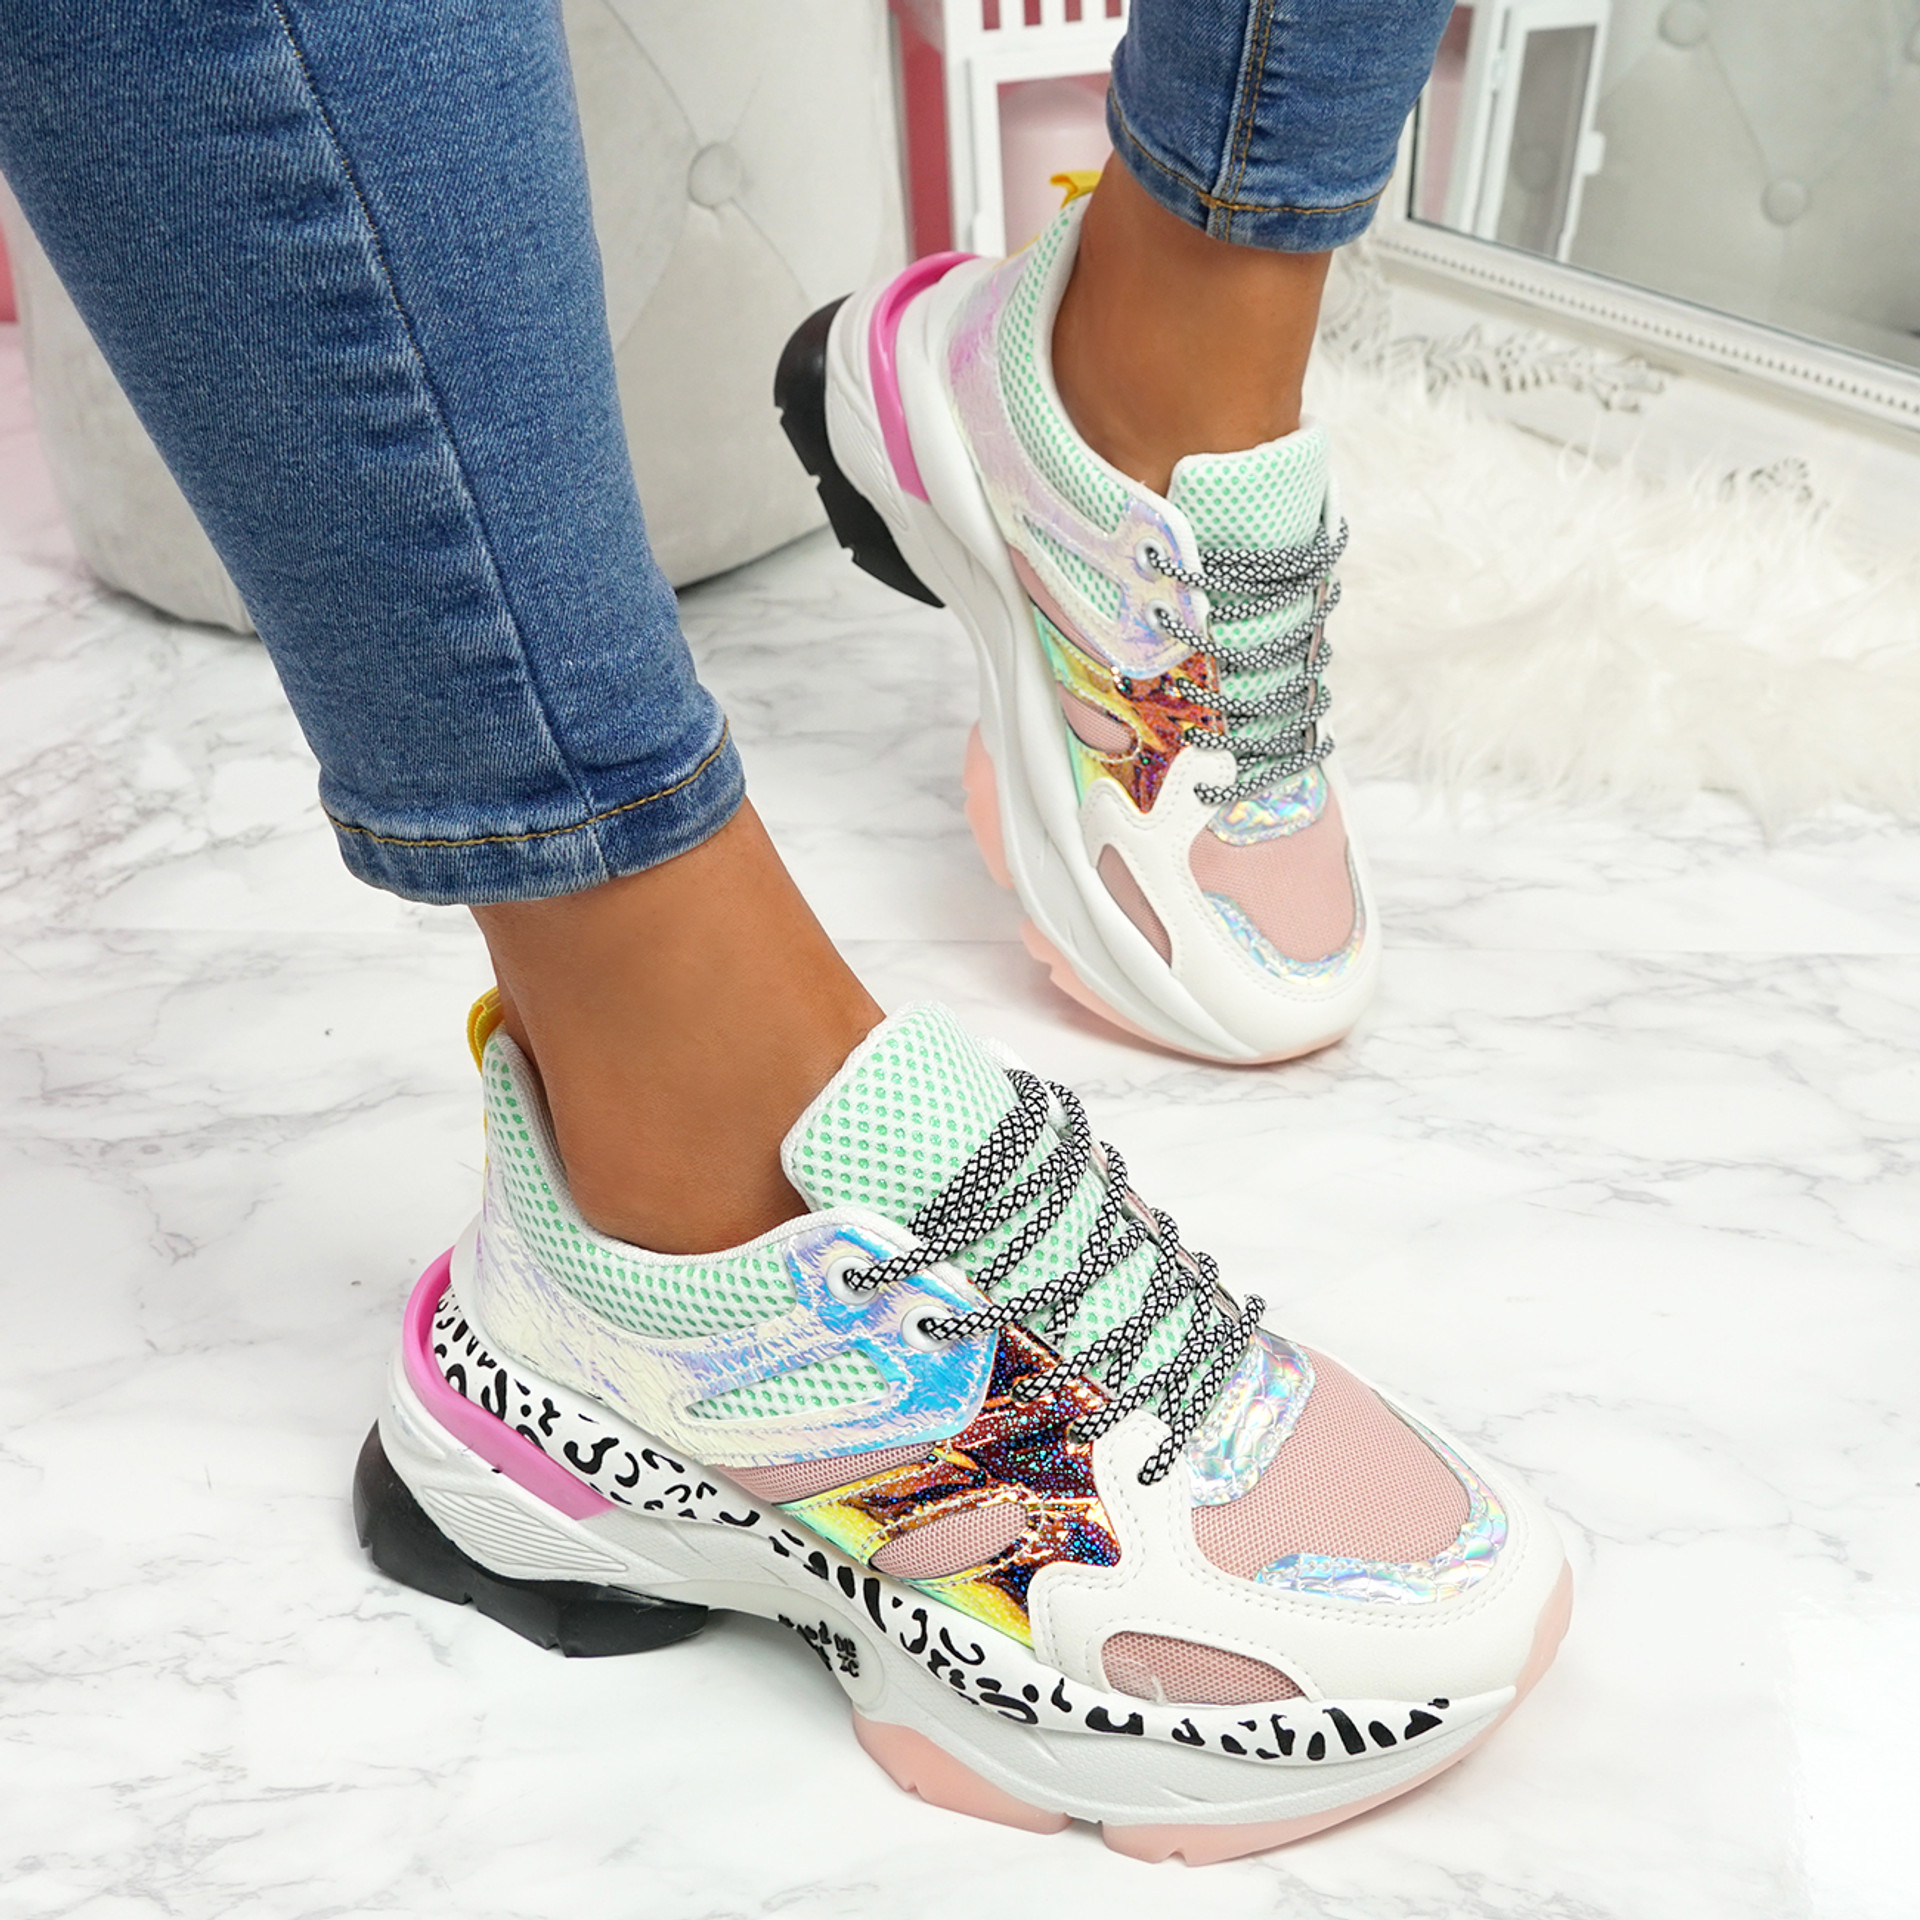 Reyna Pink Chunky Sneakers